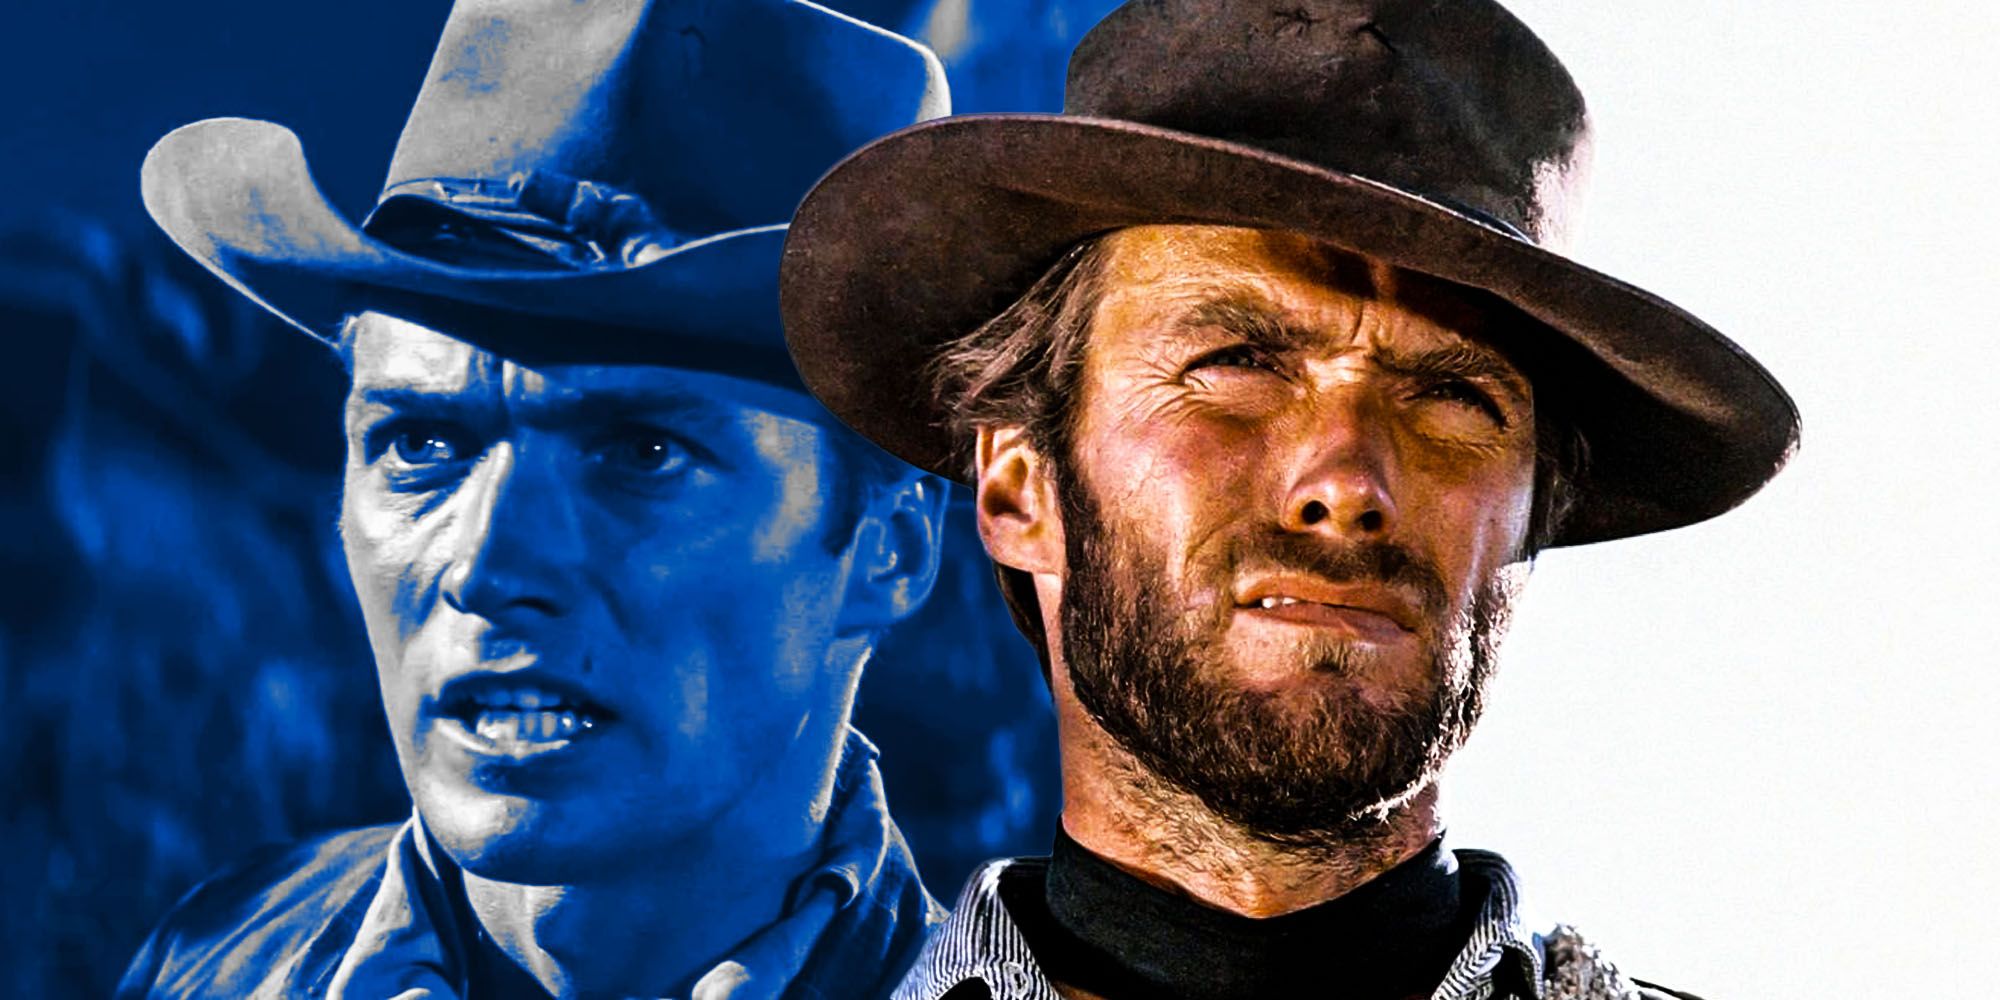 Clint Eastwood Old Western that almost made him quit Ambush at Cimarron Pass